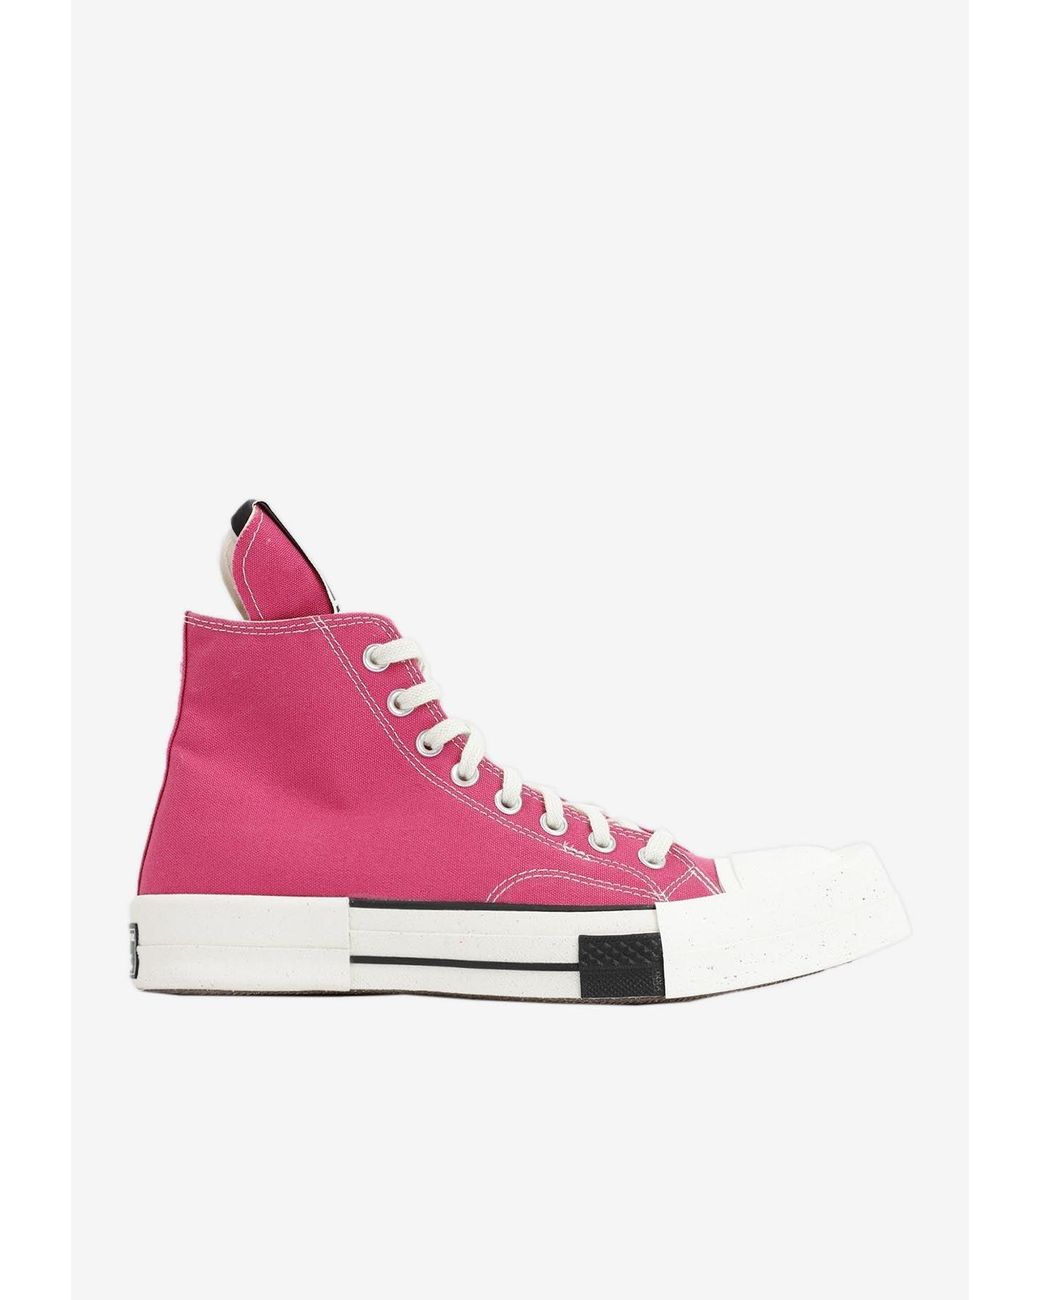 Rick Owens DRKSHDW X Converse High-top Canvas Sneakers in Pink | Lyst Canada